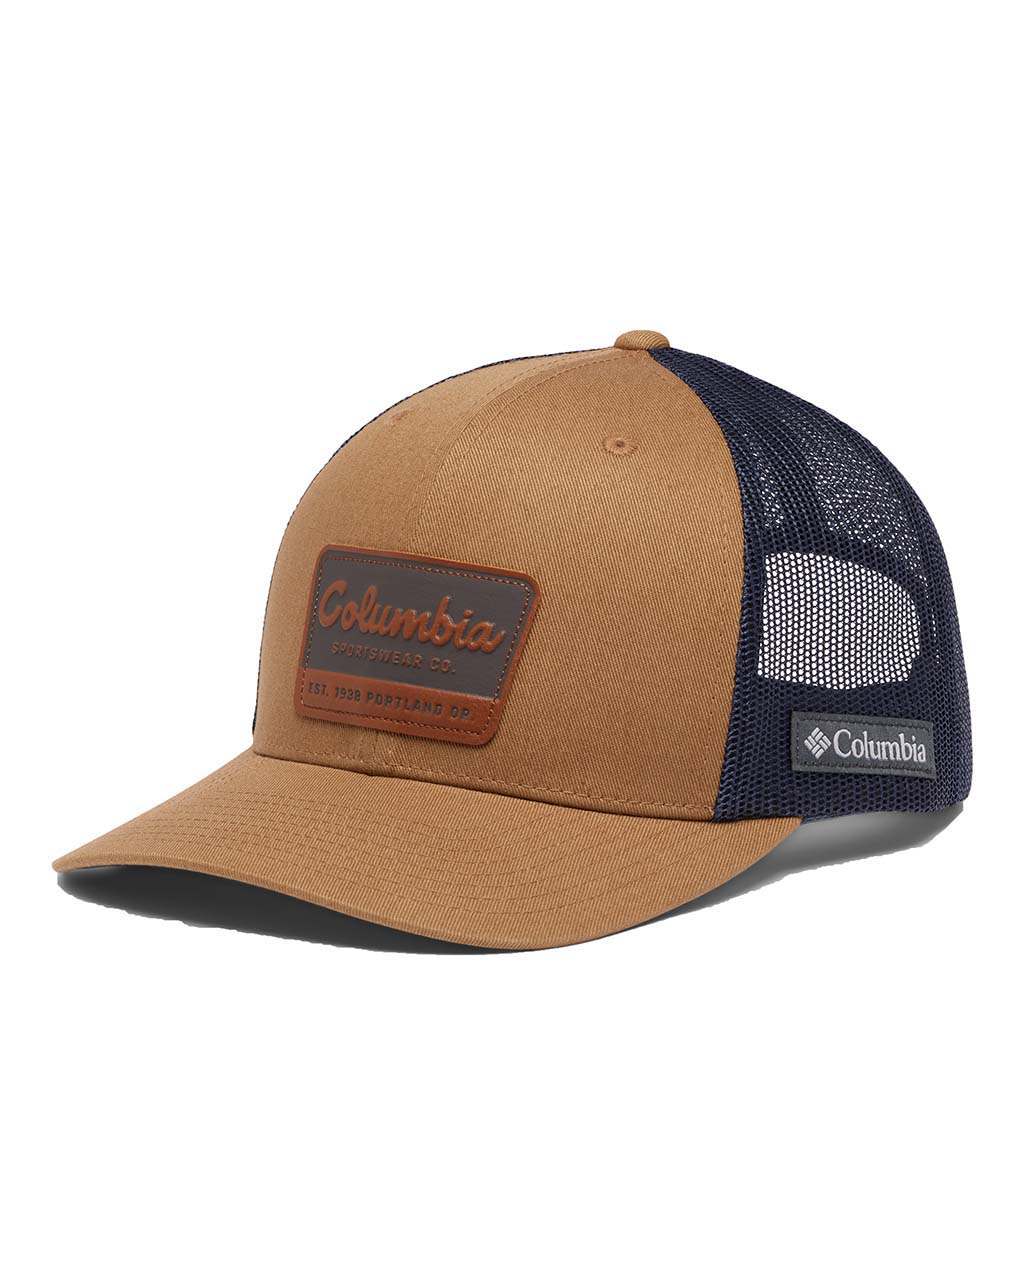 Columbia Rugged Outdoor Snap Back Delta/Collegiate Navy